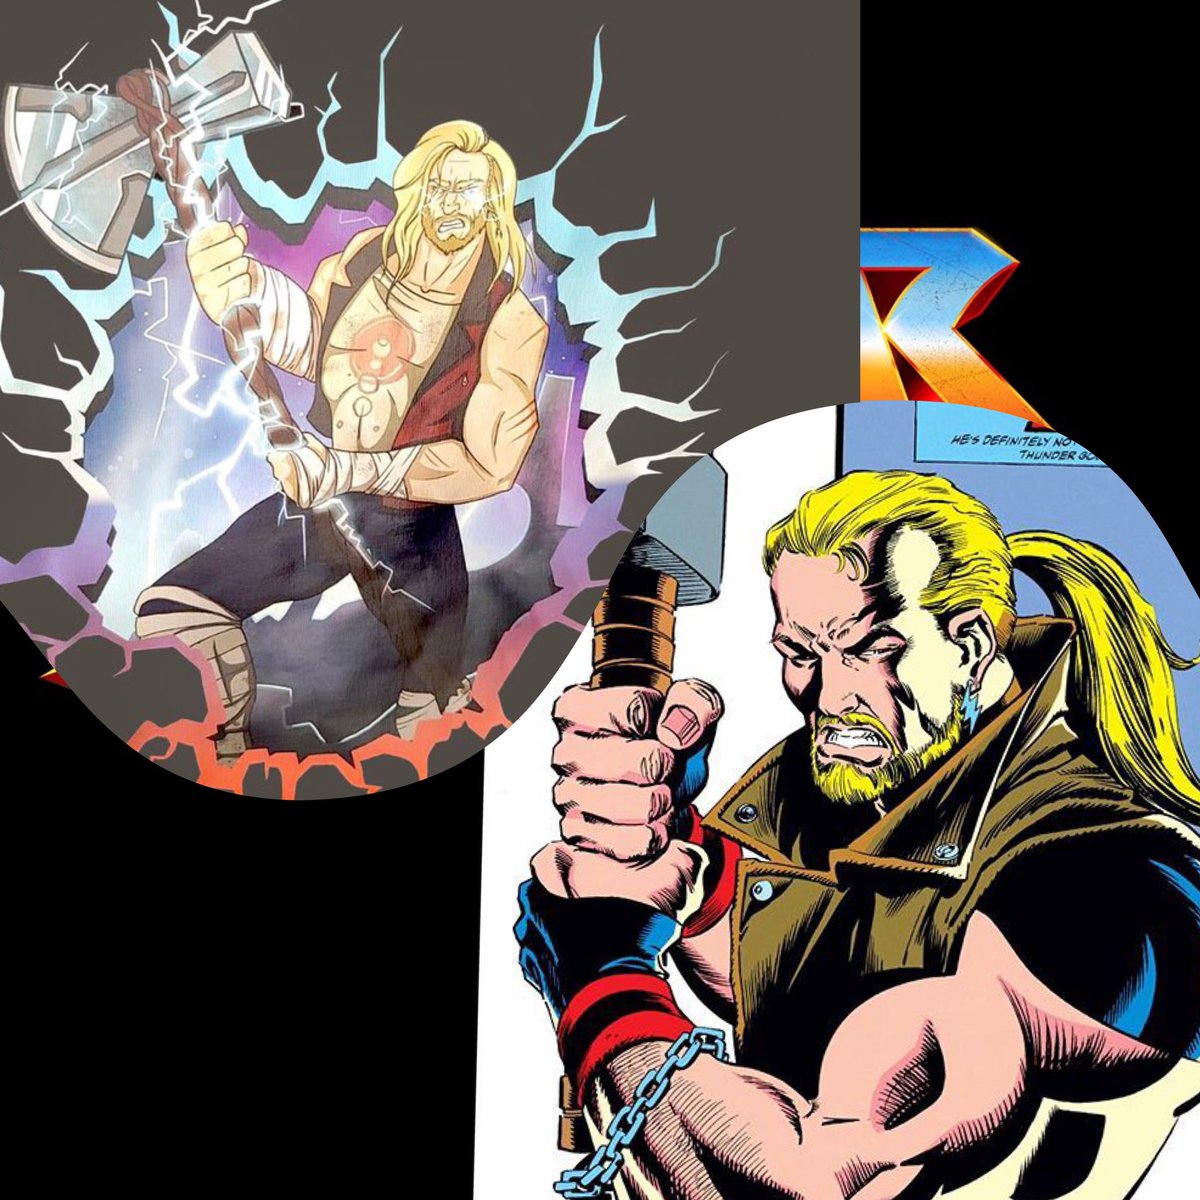 Is it just me or is anyone getting some serious 1980s Eric Masterson/ Thunderstrike vibes from the potential Thor: Love and Thunder promo art? @TaikaWaititi what say you sir? 
#thorloveandthunder #chrishemsworth #natalieportman #mcu https://t.co/mee6ifZNhf